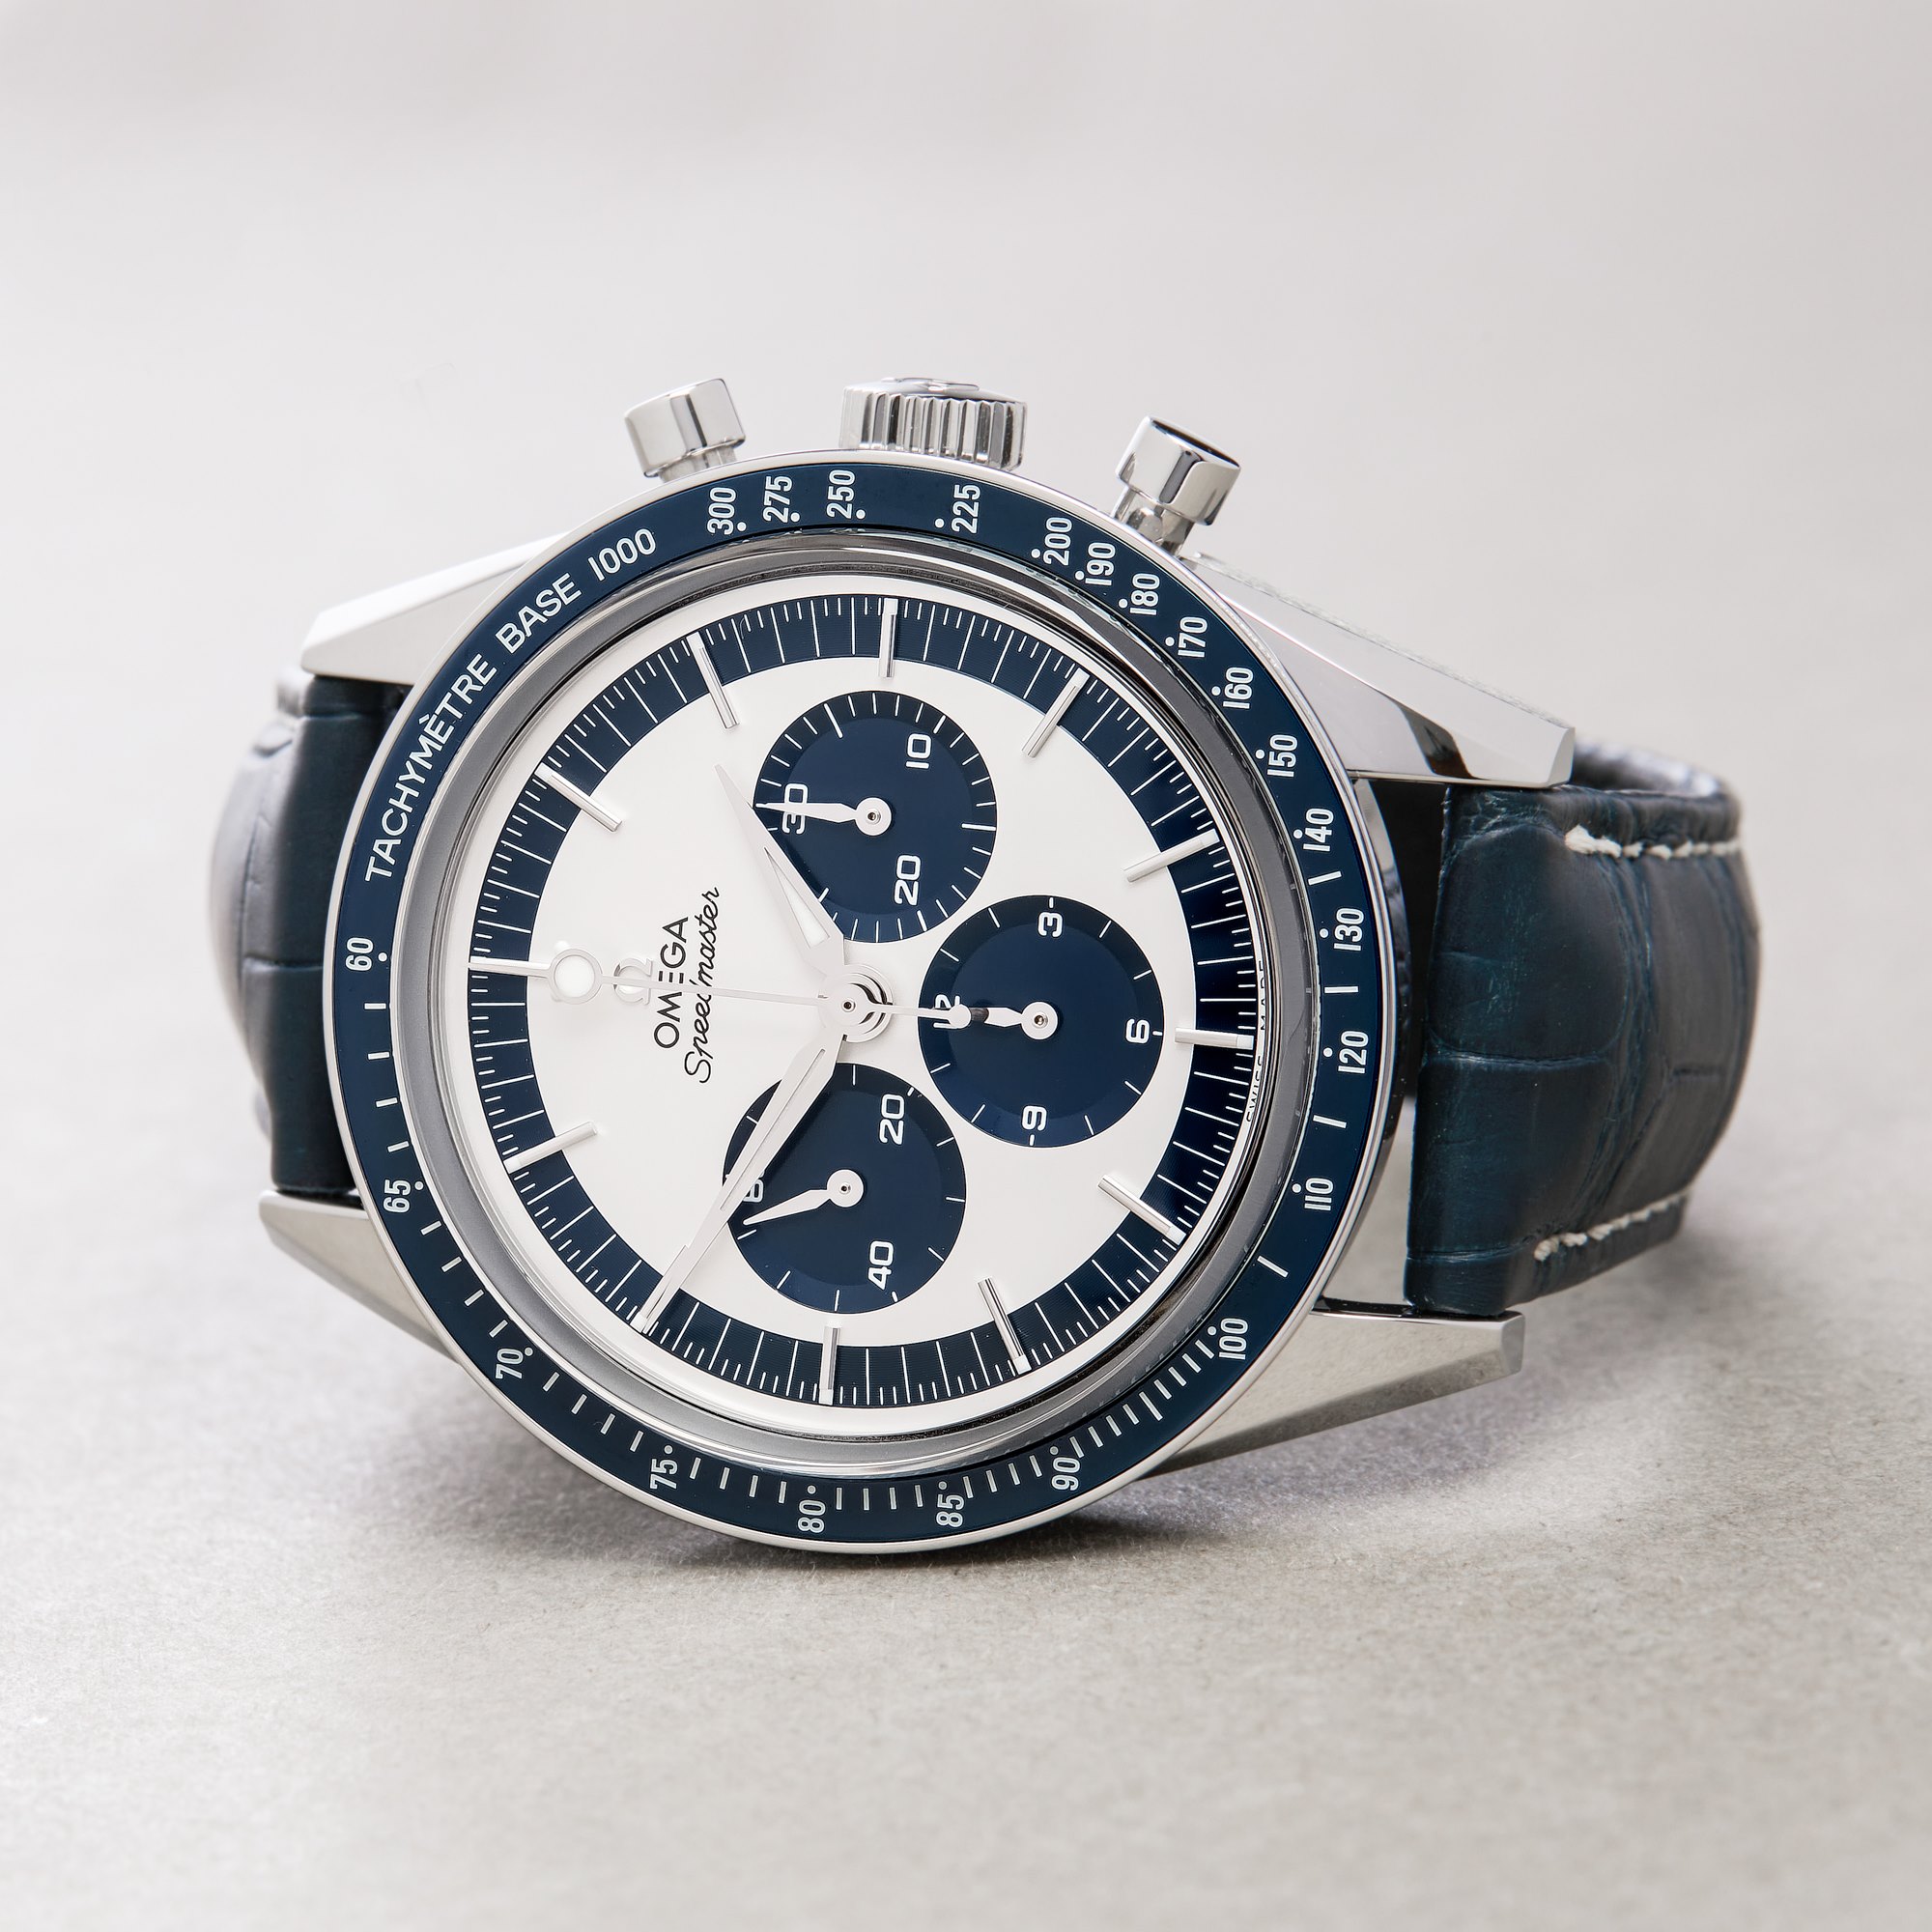 Omega Speedmaster Limited Edition of 998 Pieces CK2998 Roestvrij Staal 311.33.40.30.02.001